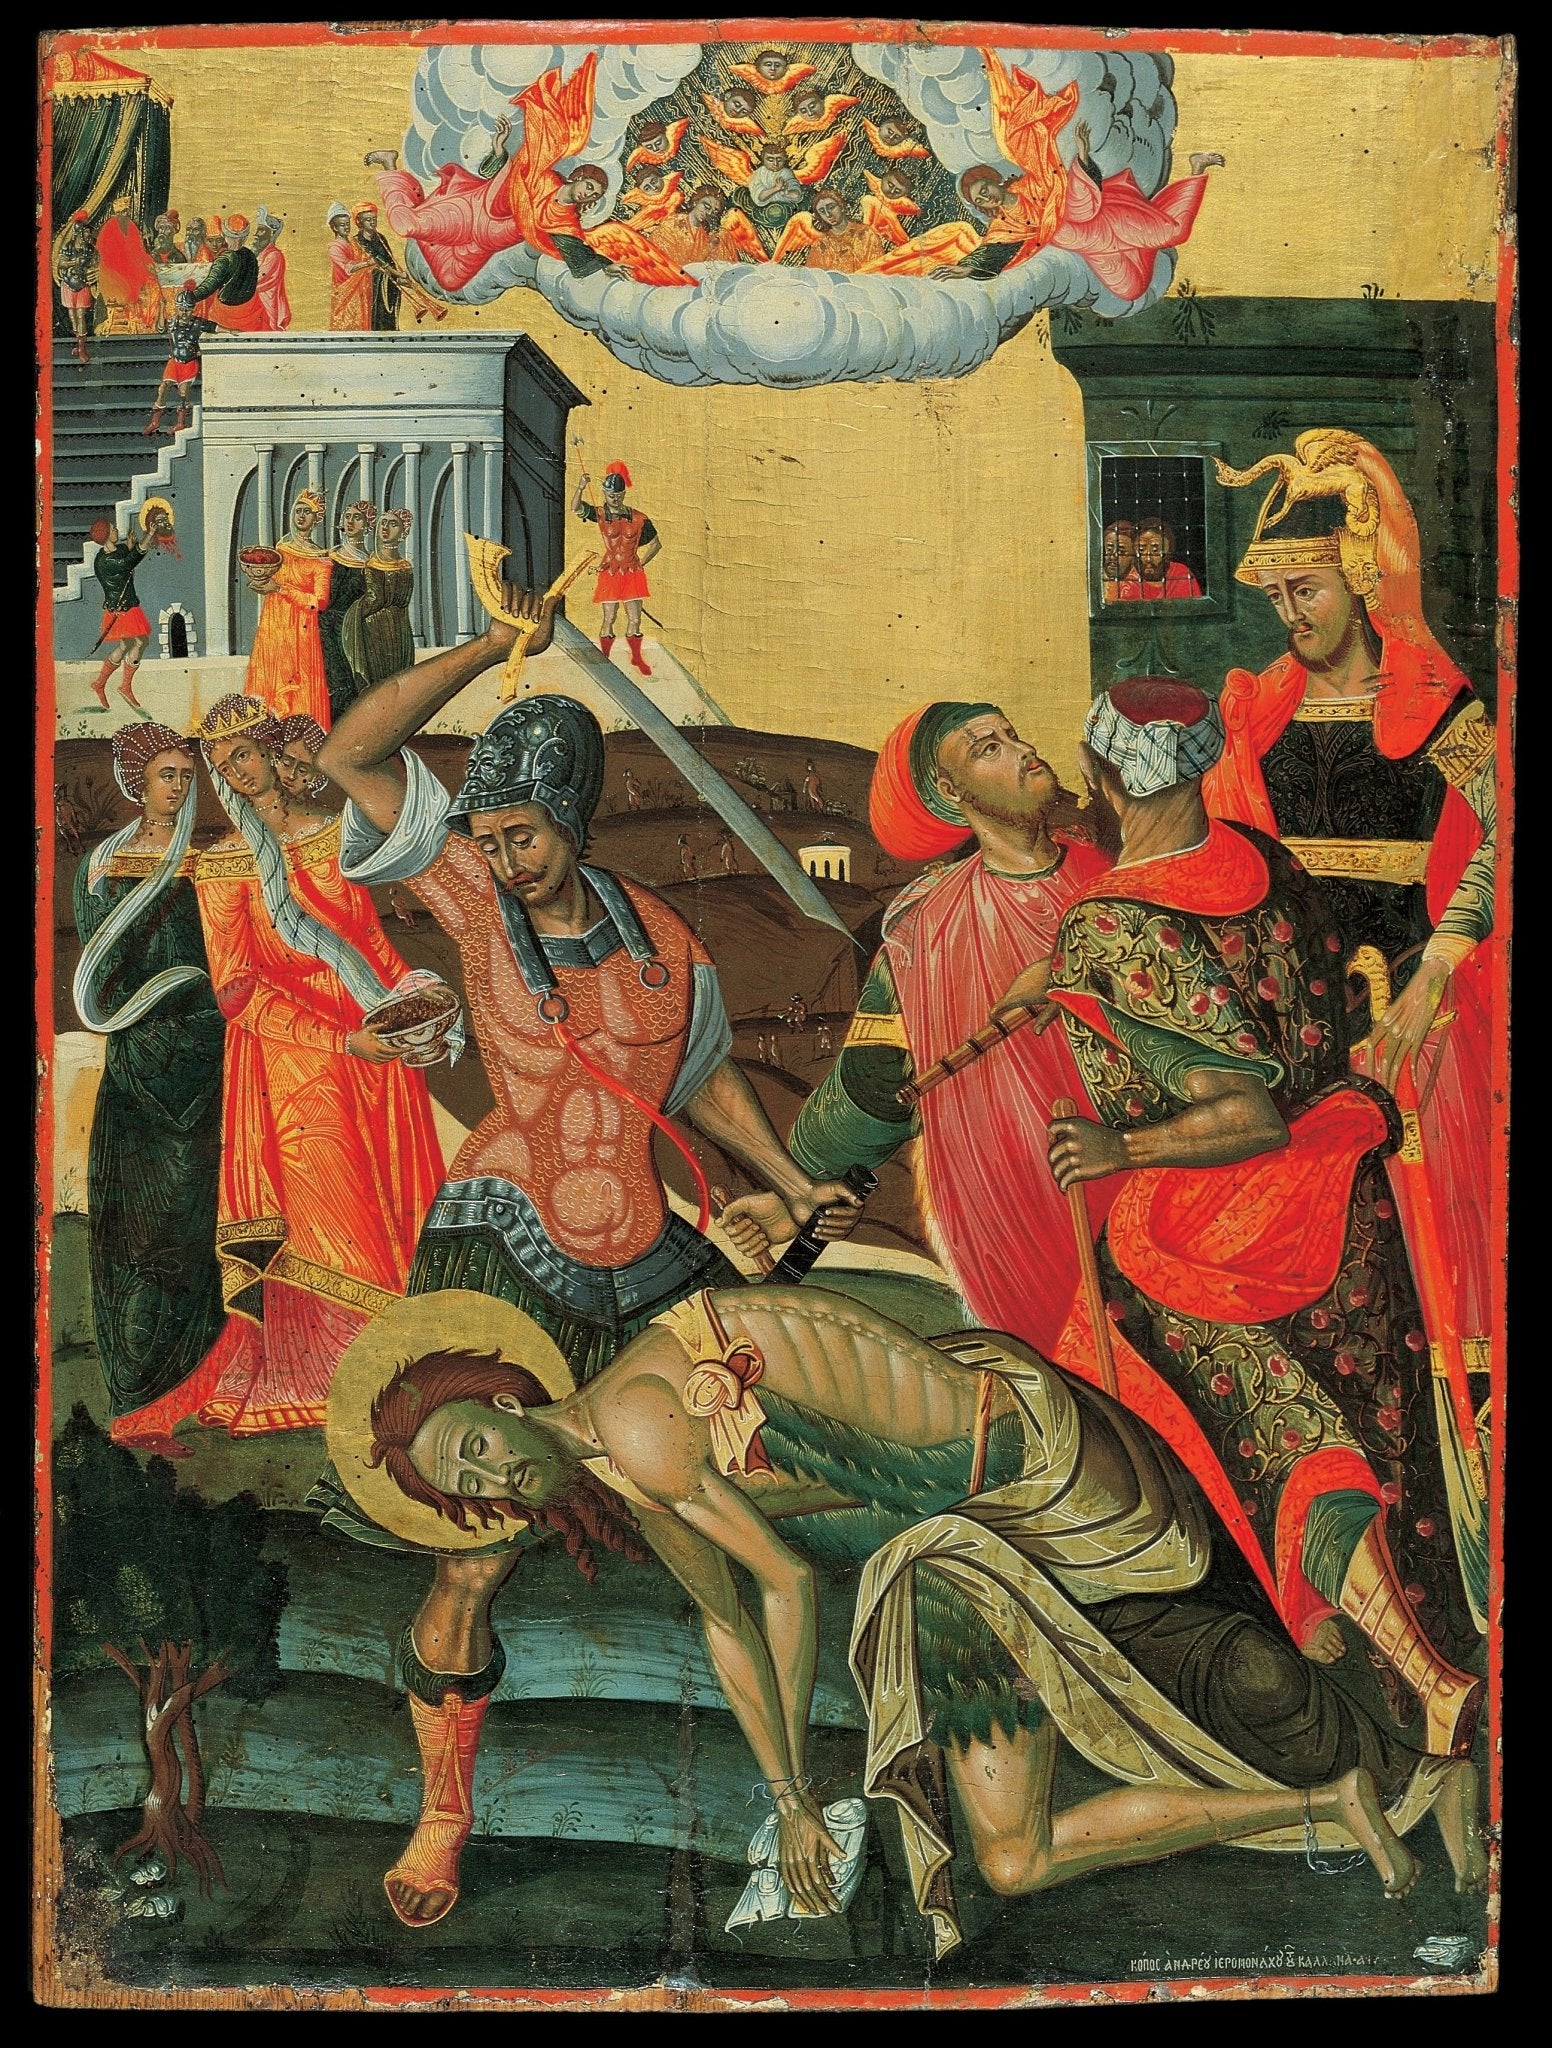 Menpleasing and Murder: A Homily for the Beheading of the Forerunner (2019) - Holy Cross Monastery